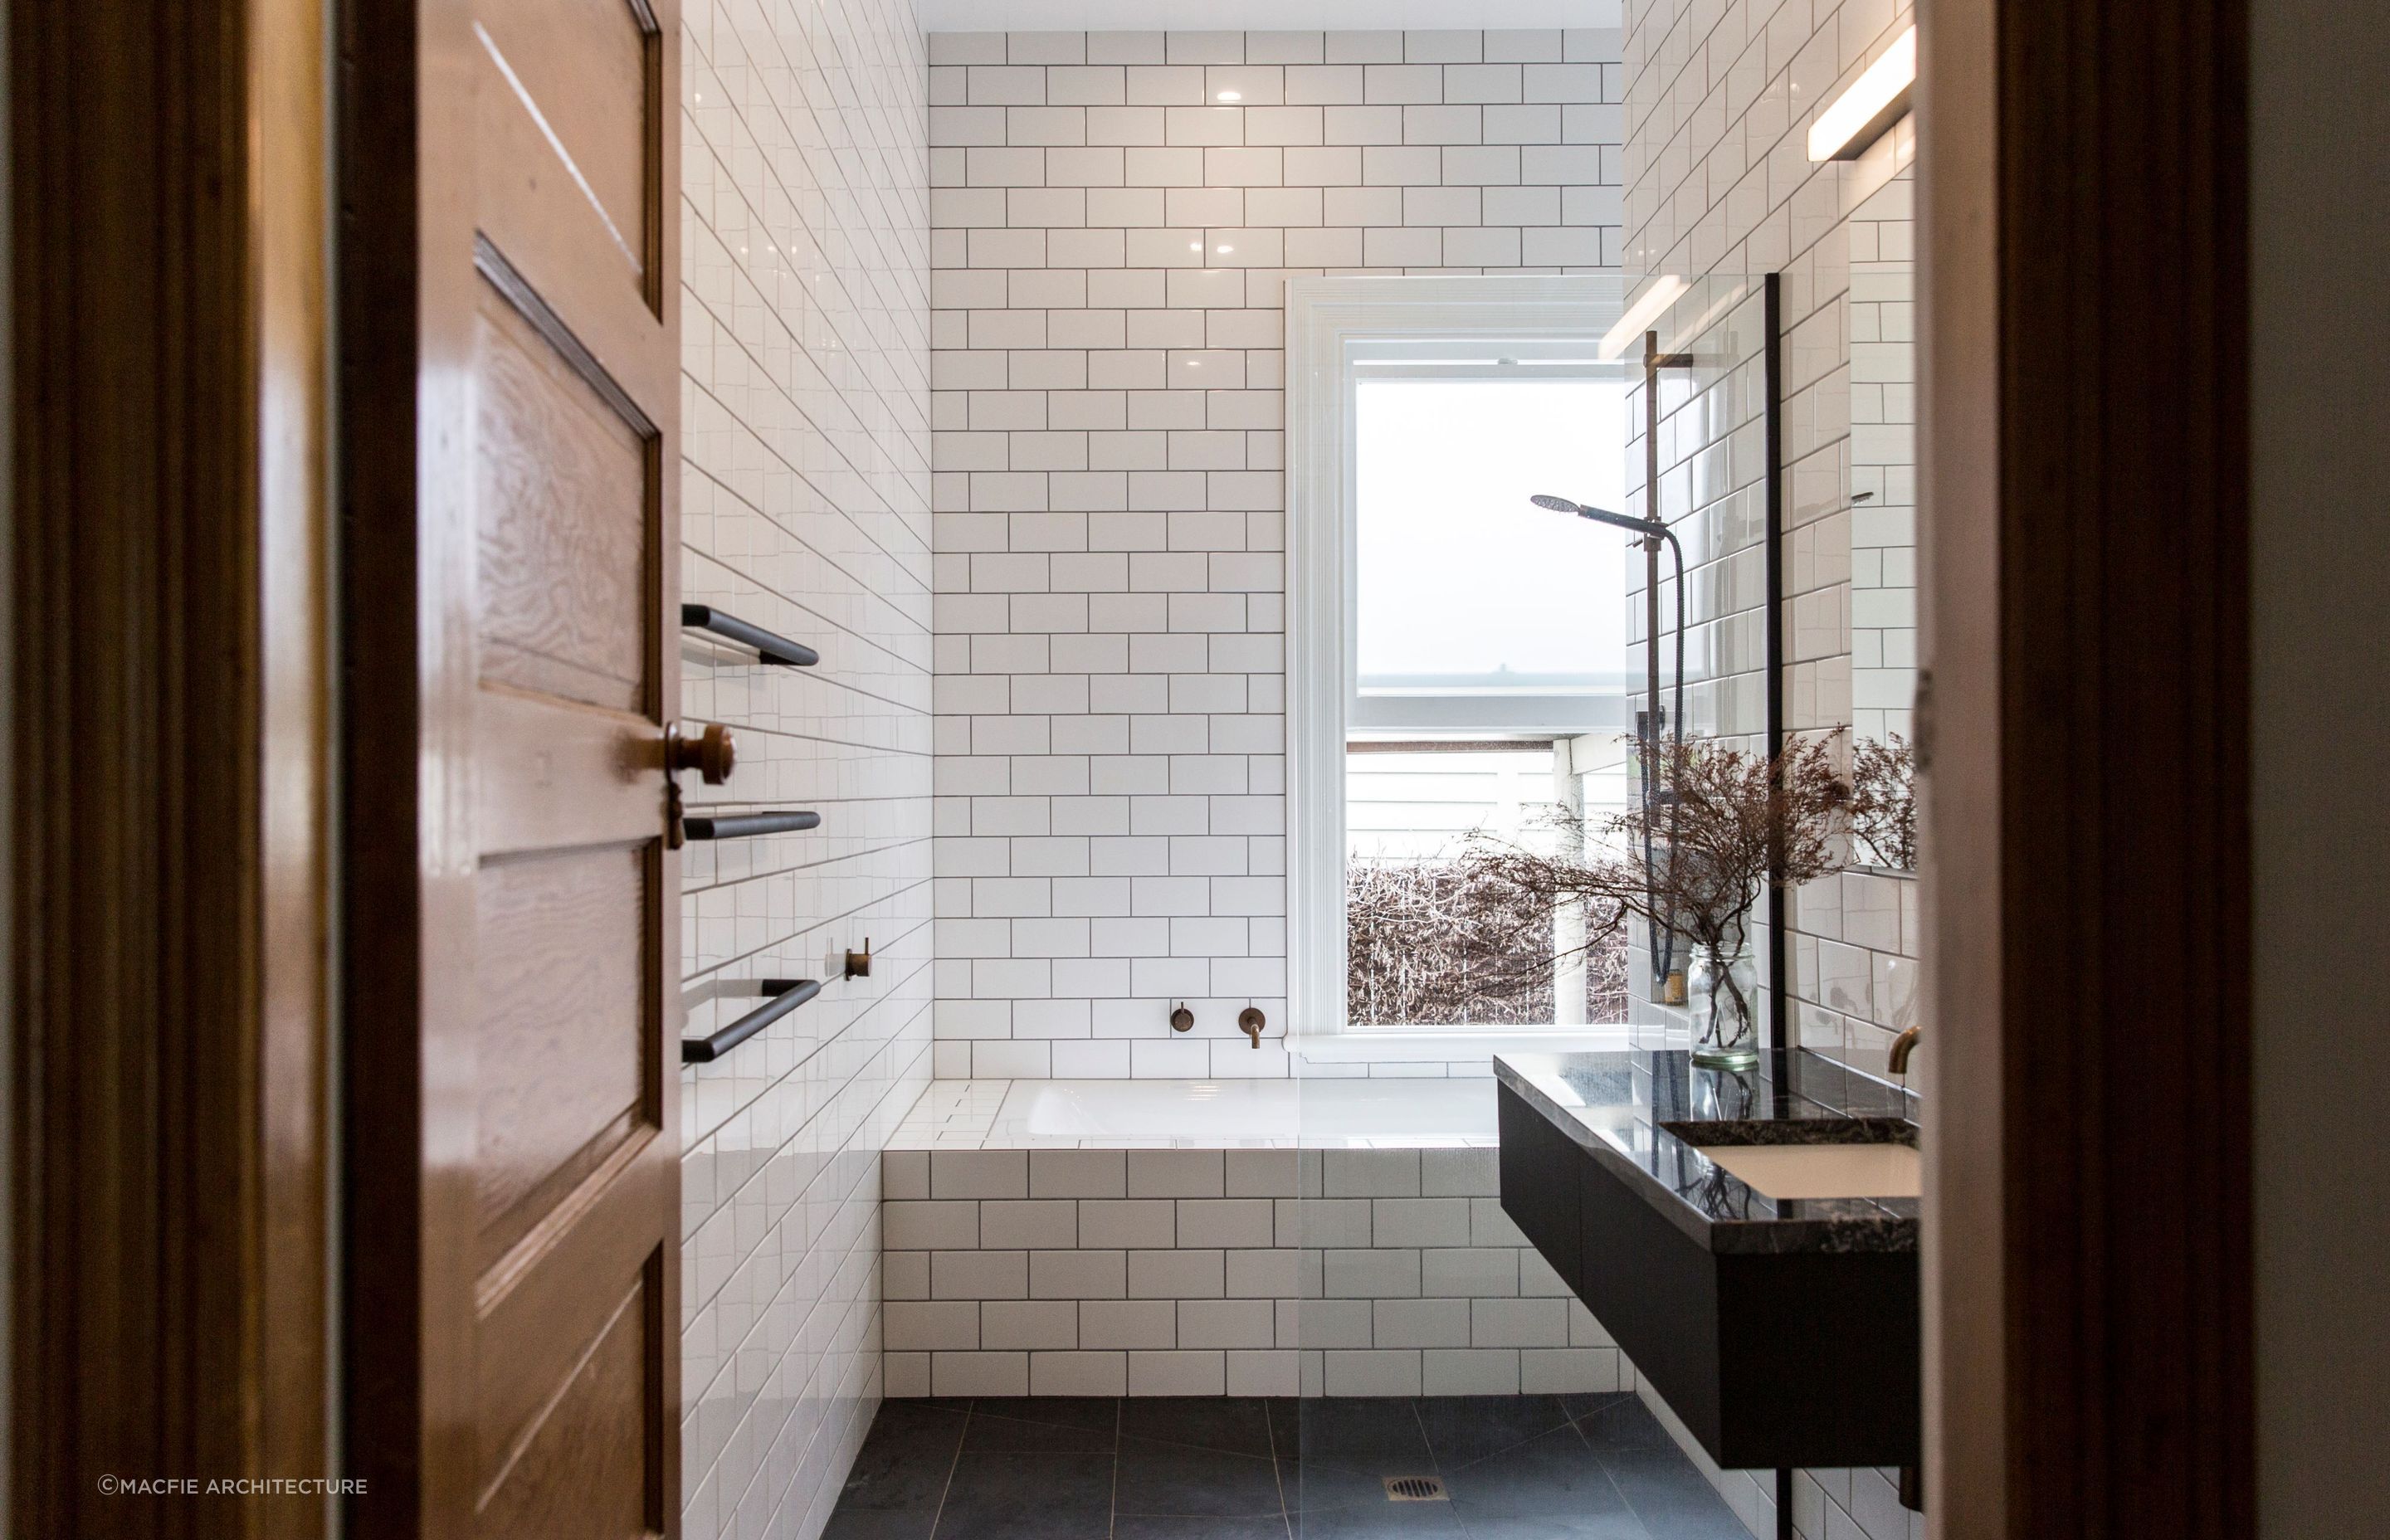 The subway tile is the timeless, classic choice for any bathroom, seen here in this alpine bathroom in Queenstown.